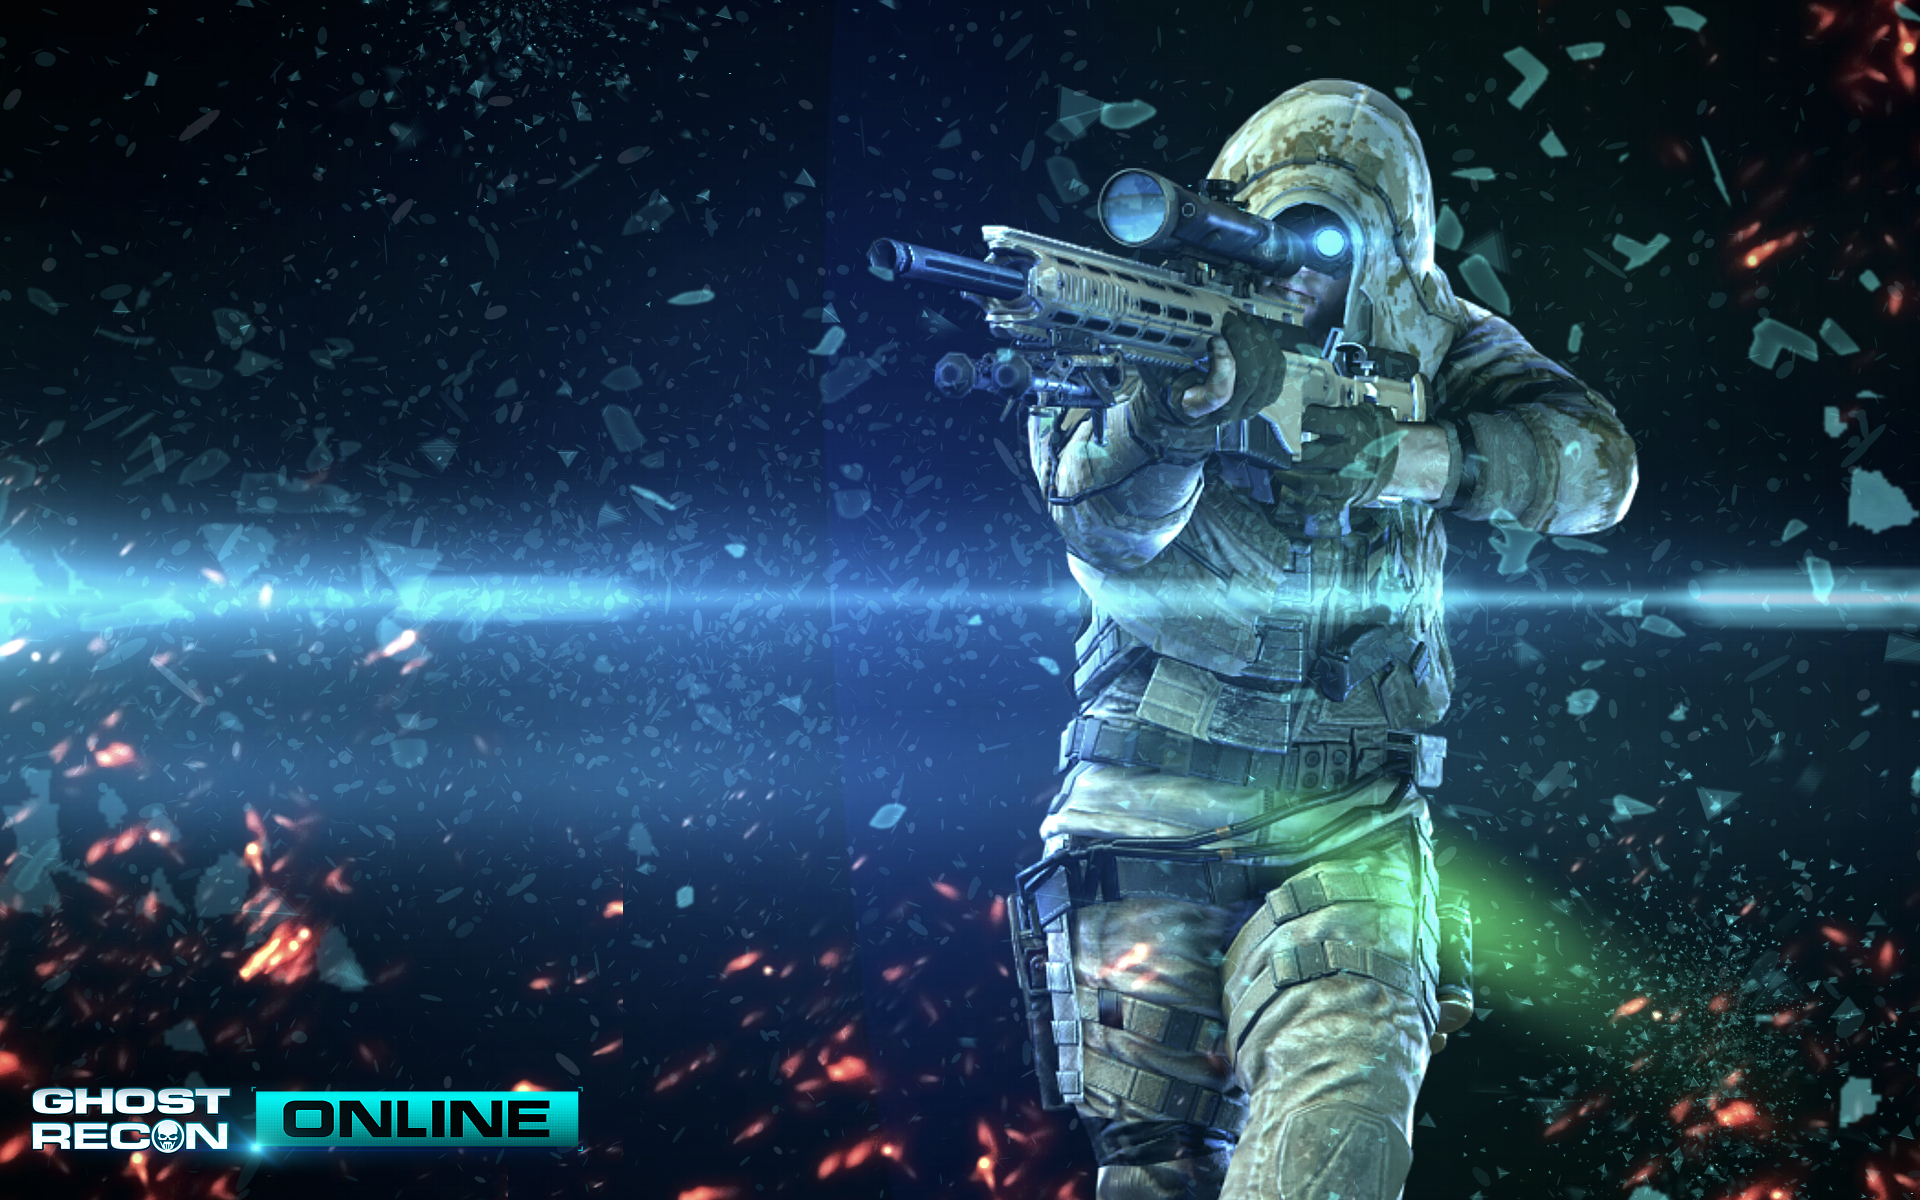 This Tom Cy S Ghost Recon Phantoms Wallpaper Is Available